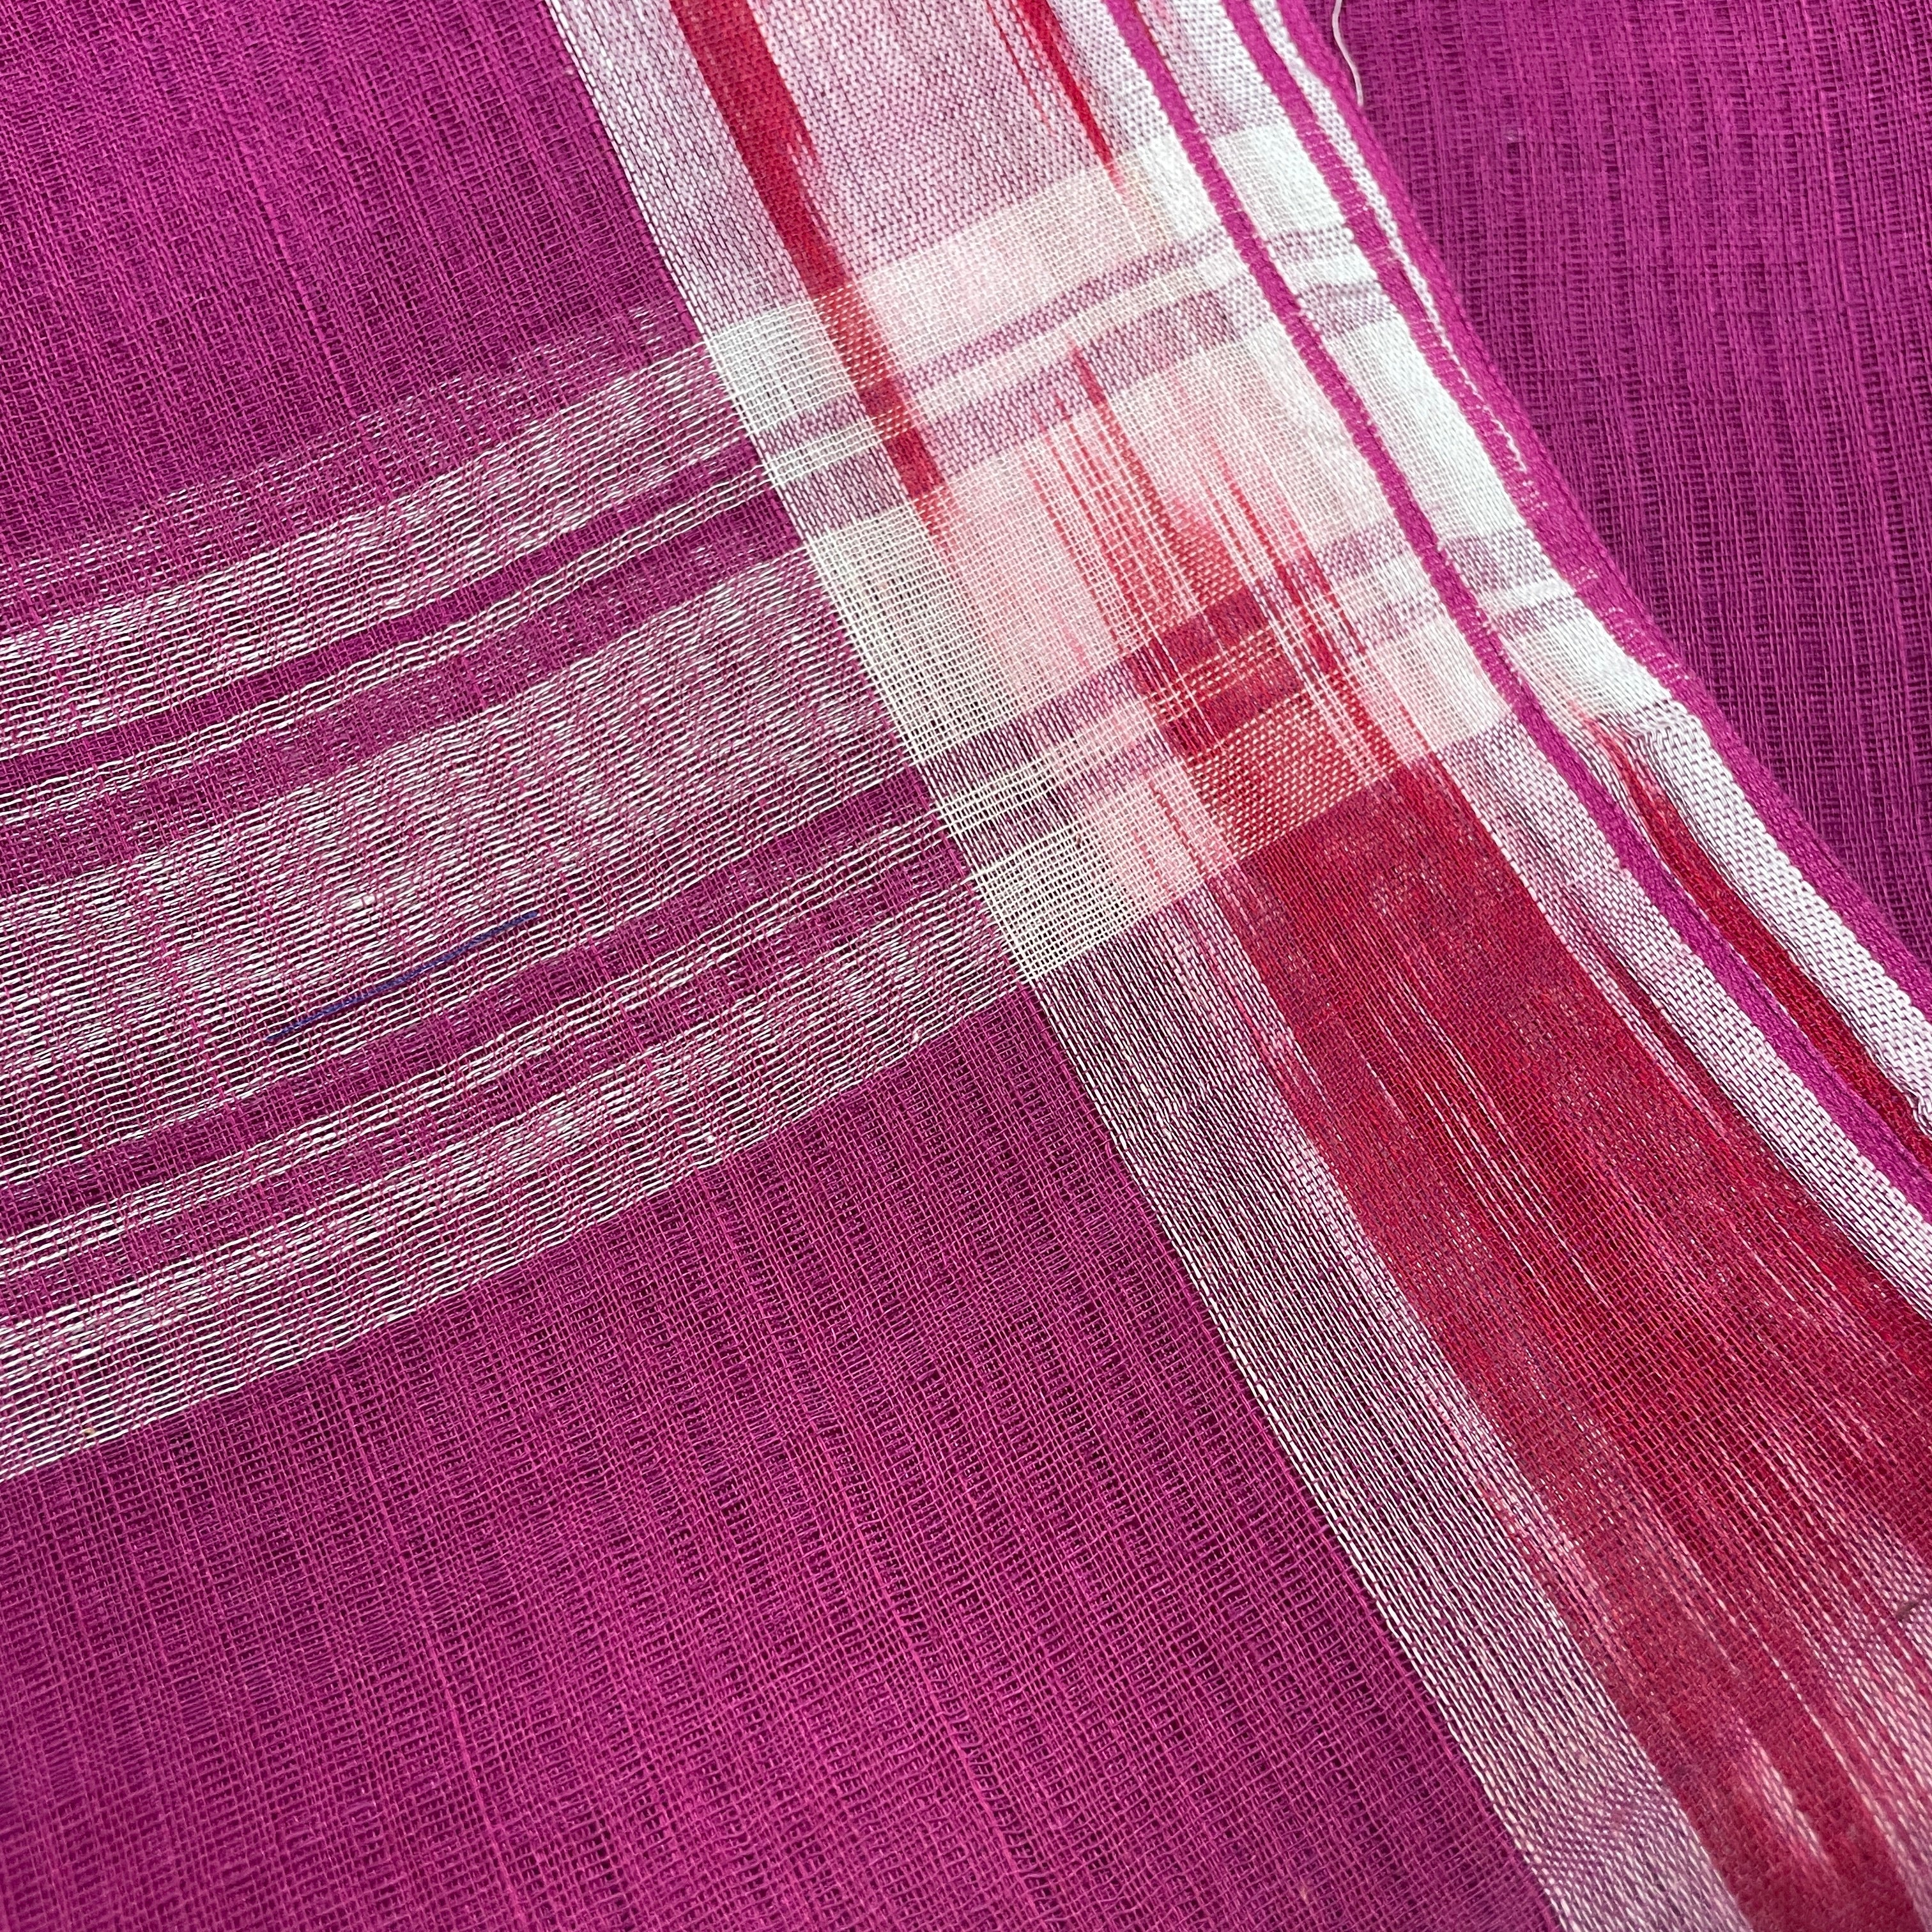 Handwoven Ikat Scarves-5 Colors - Vintage India NYC